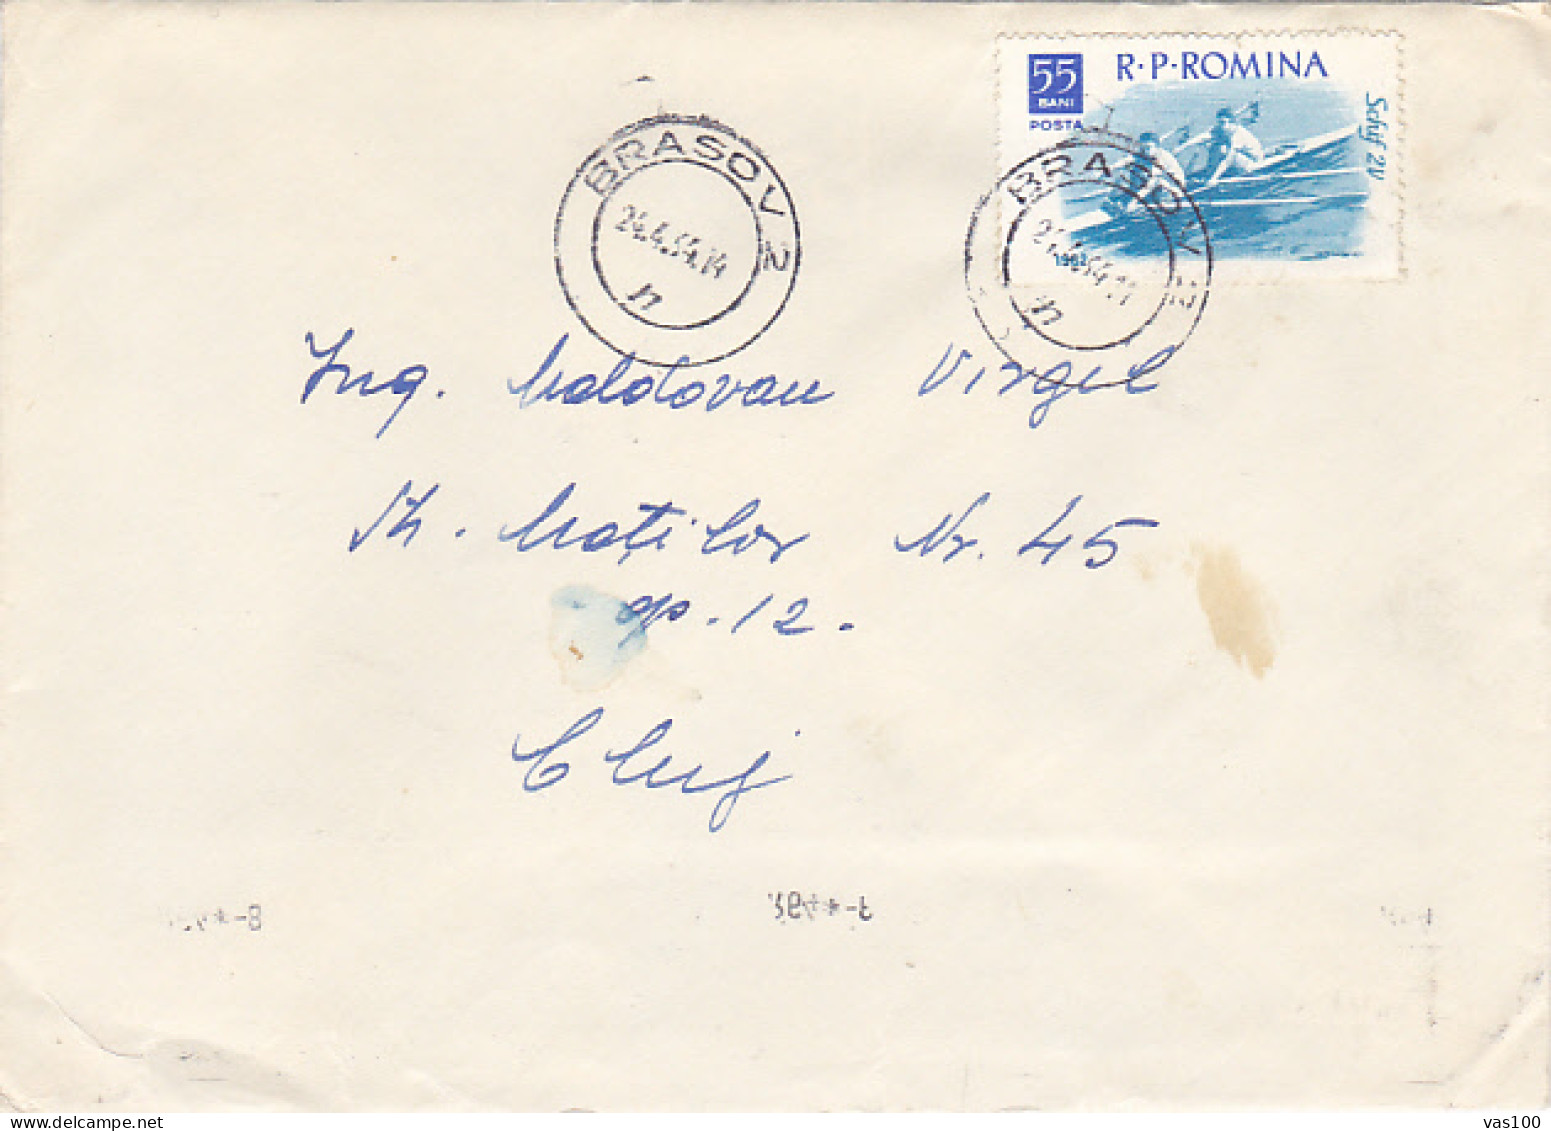 ROWING, TEAM OF 2, STAMP ON COVER, 1964, ROMANIA - Covers & Documents